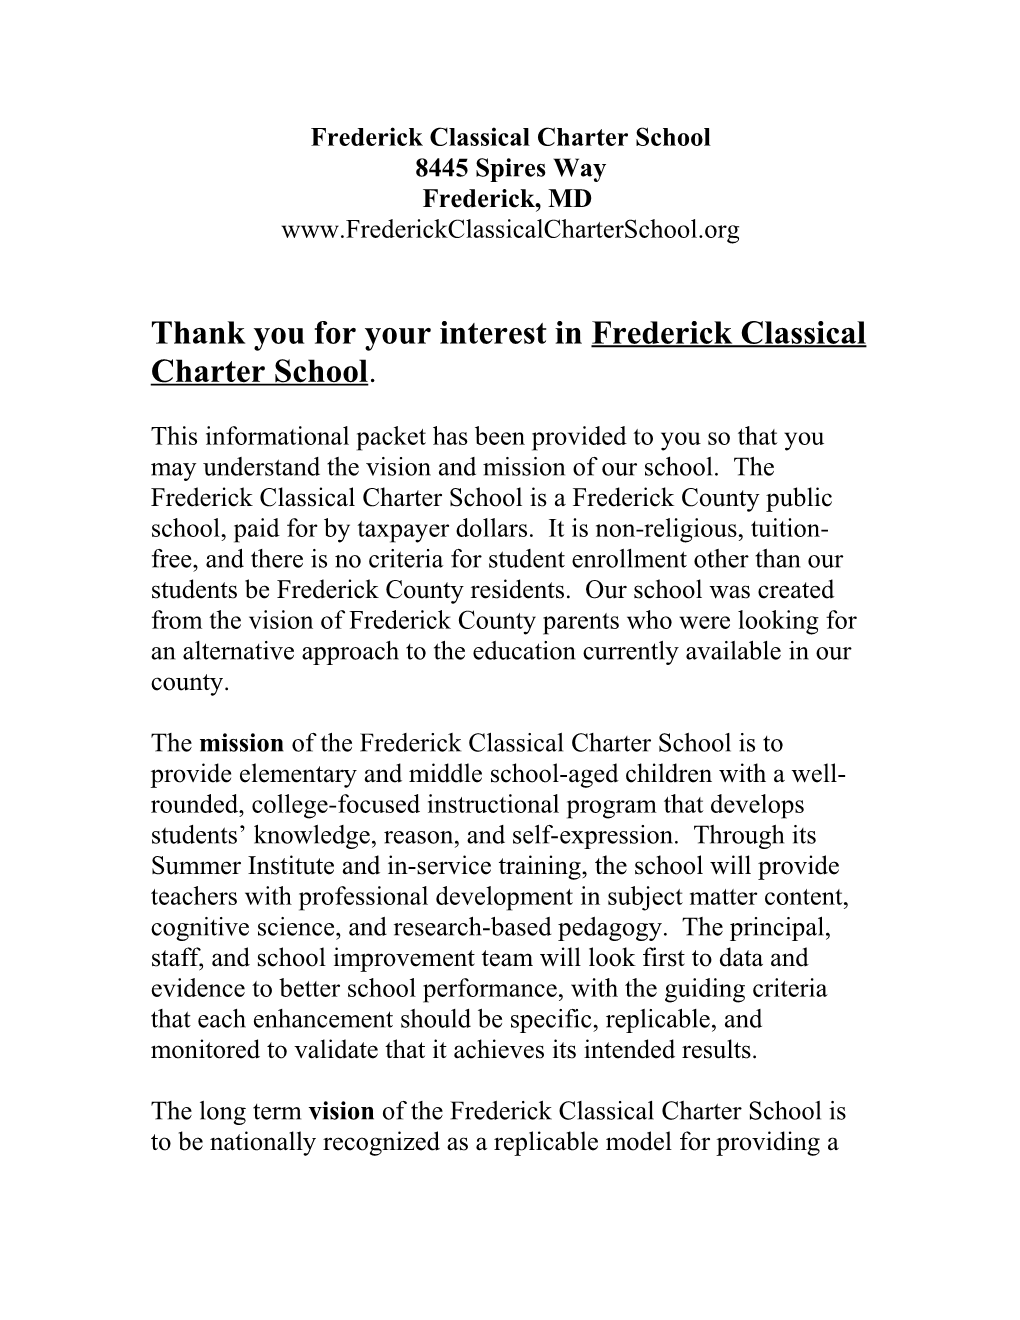 Thank You for Your Interest in Frederick Classical Charter School